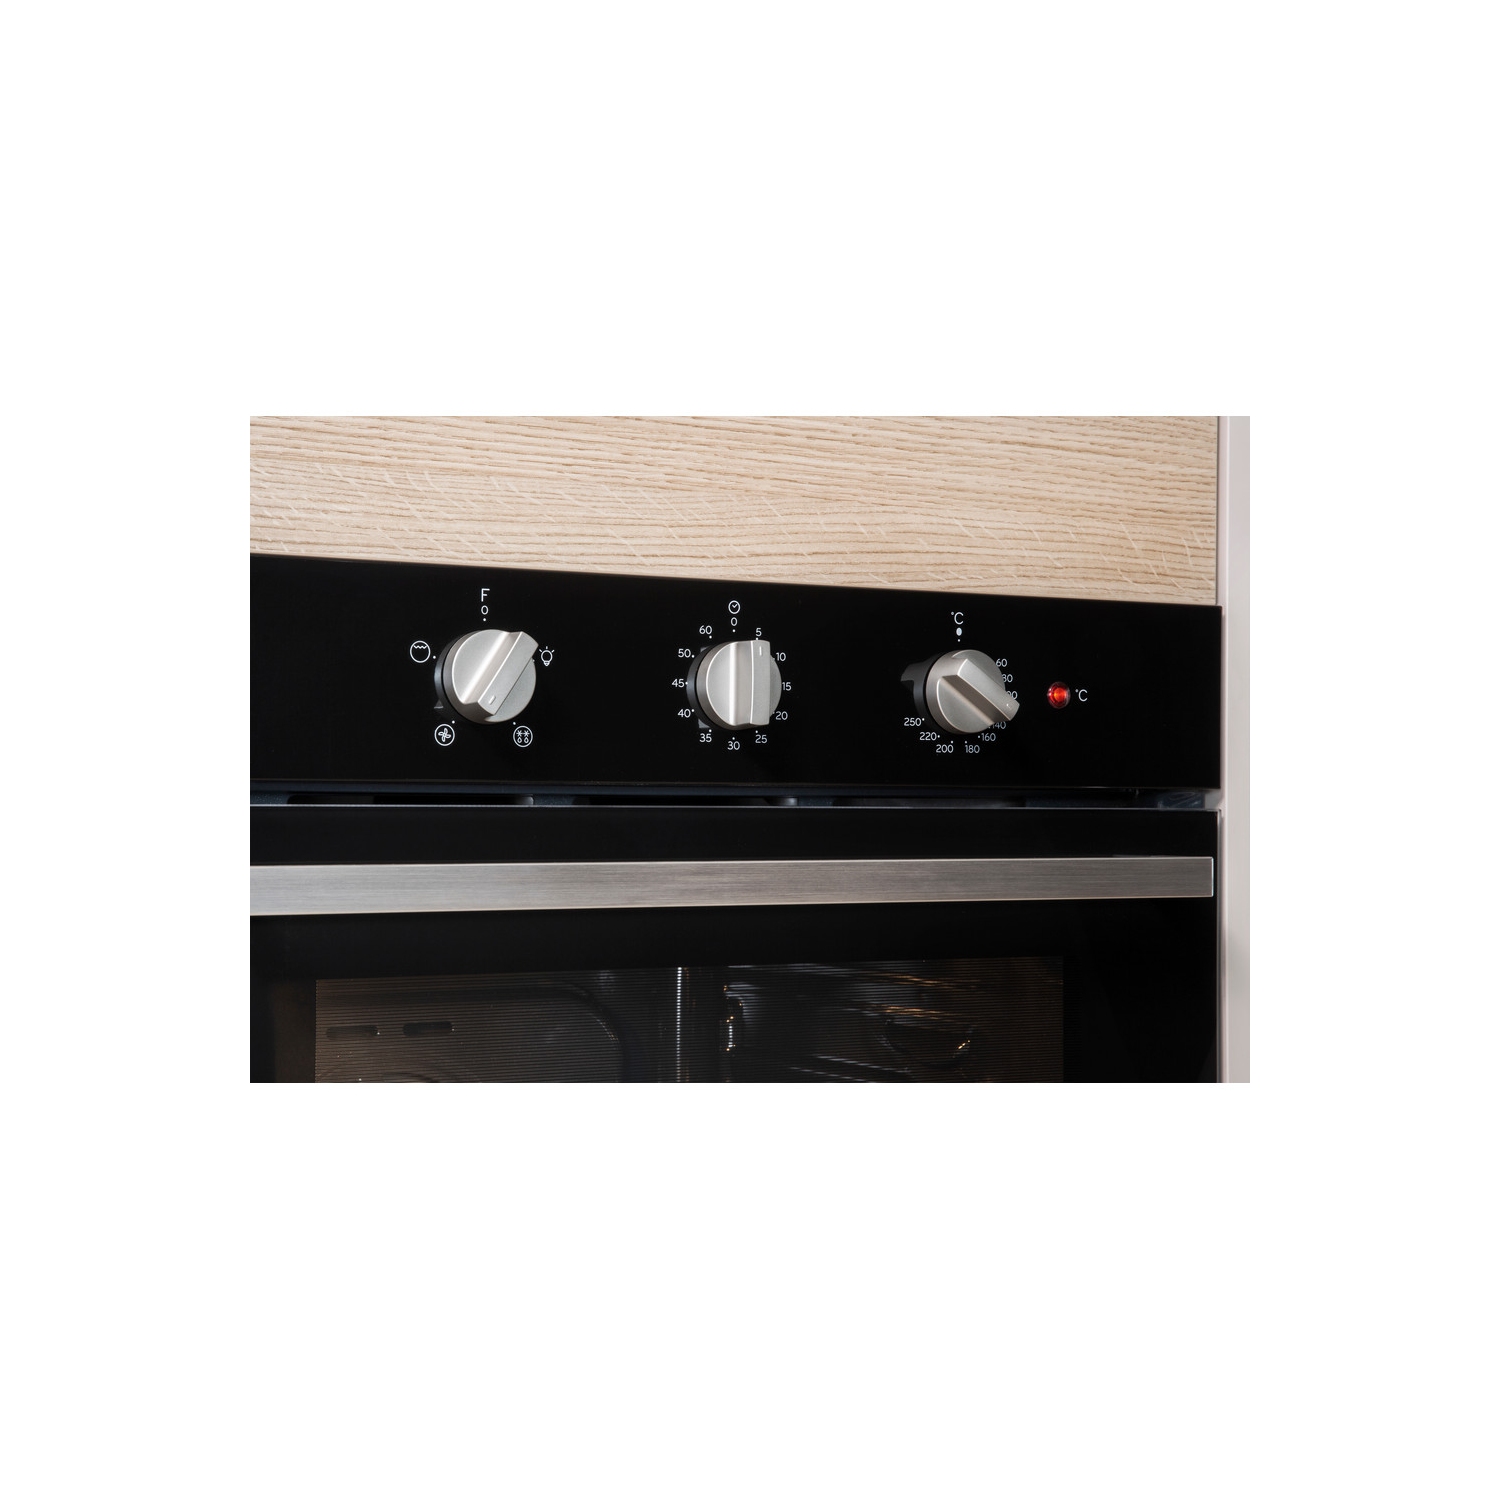 Indesit Built In Electric Single Oven - Black - A Rated - 5